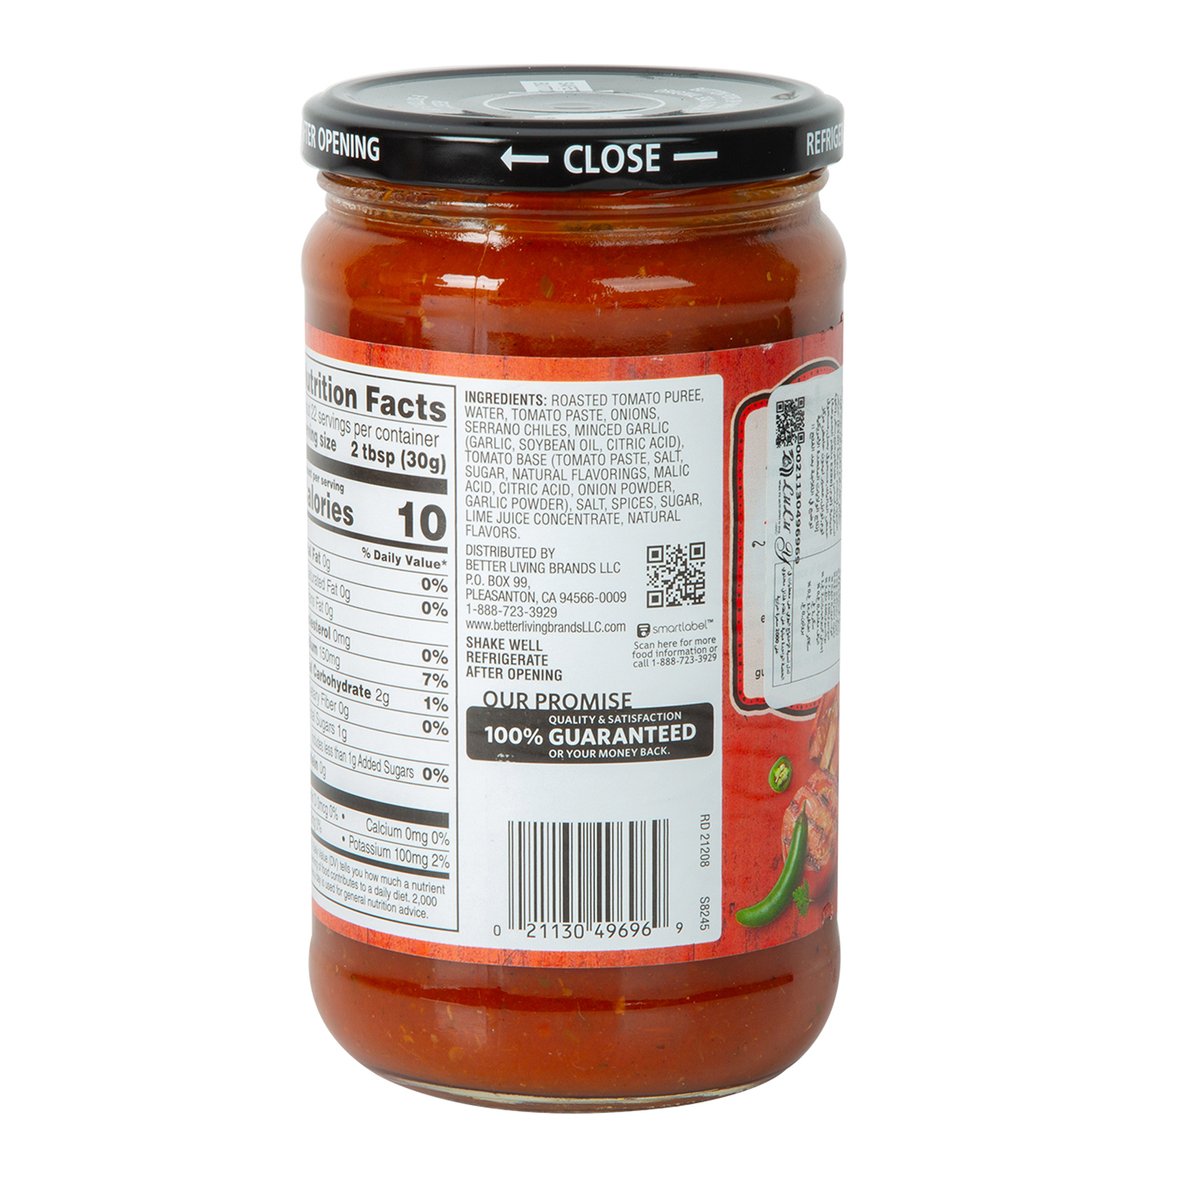 Signature Select Restaurant Style Fire-Roasted Tomato Salsa 680 g